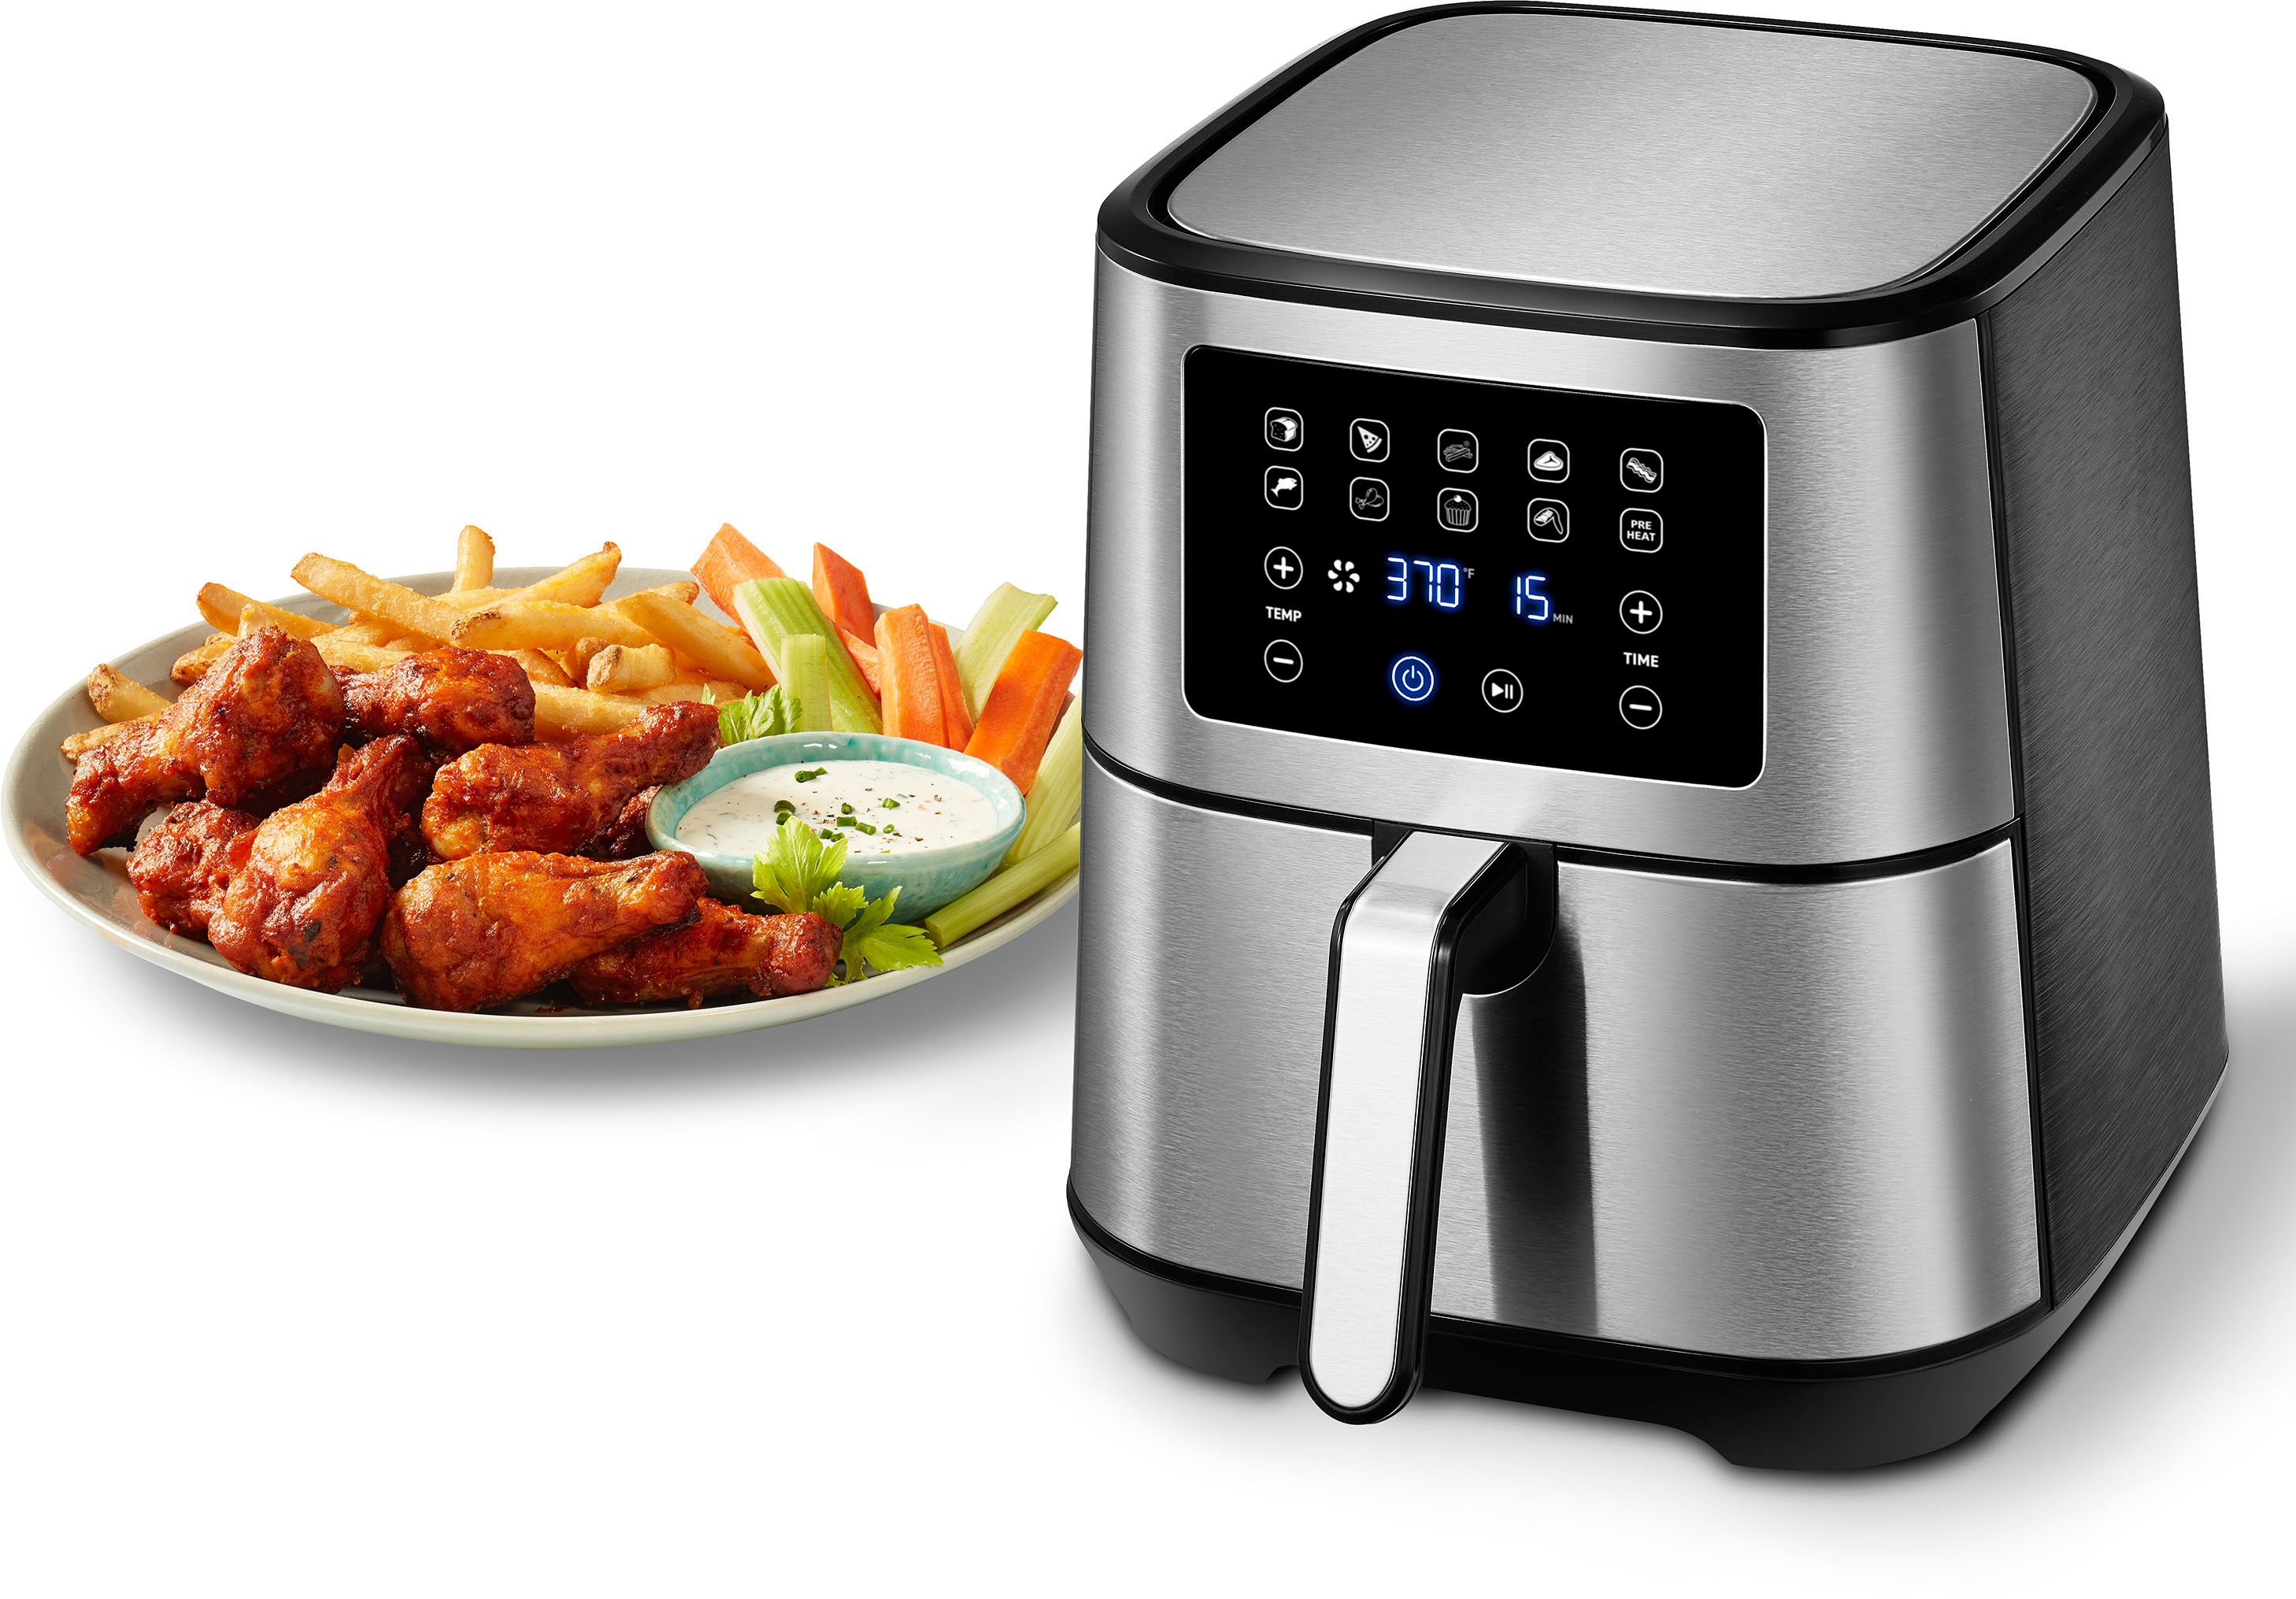 Insignia™ - NS-AF5MSS2 5 Qt. Analog Air Fryer - Stainless Steel - Upscaled